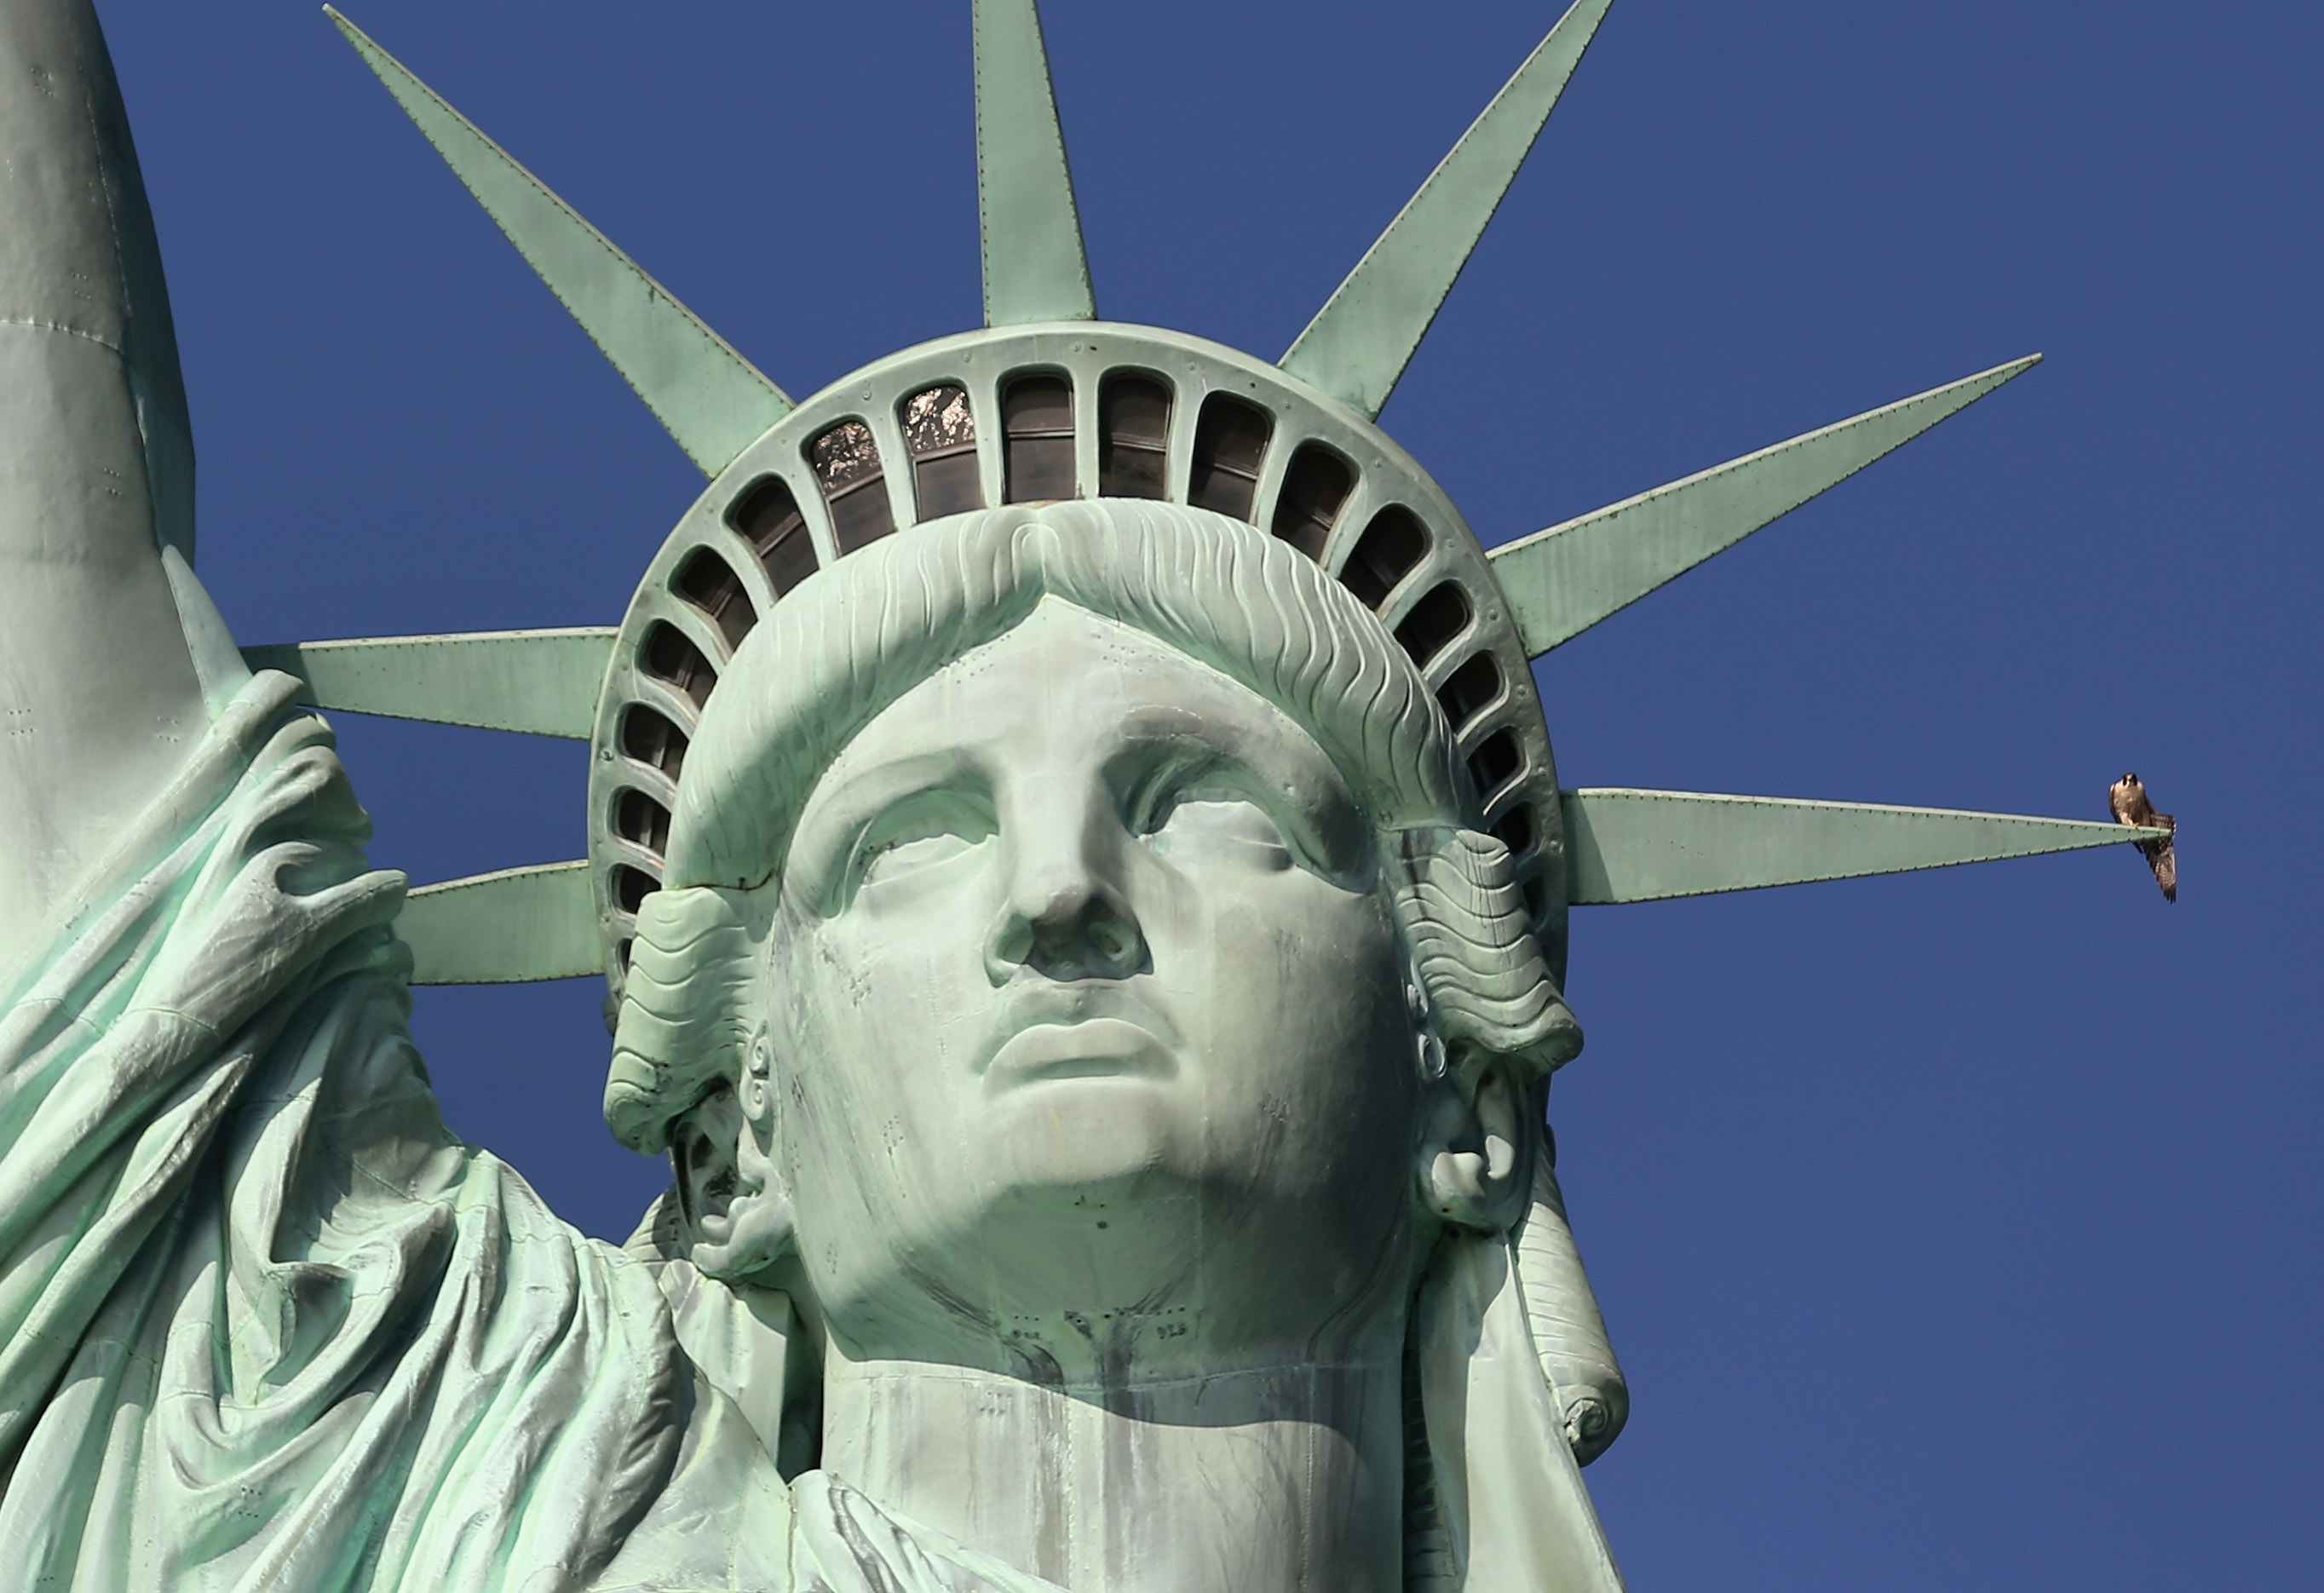 How Much Does It Cost to Go Inside the Statue of Liberty? | Getaway USA